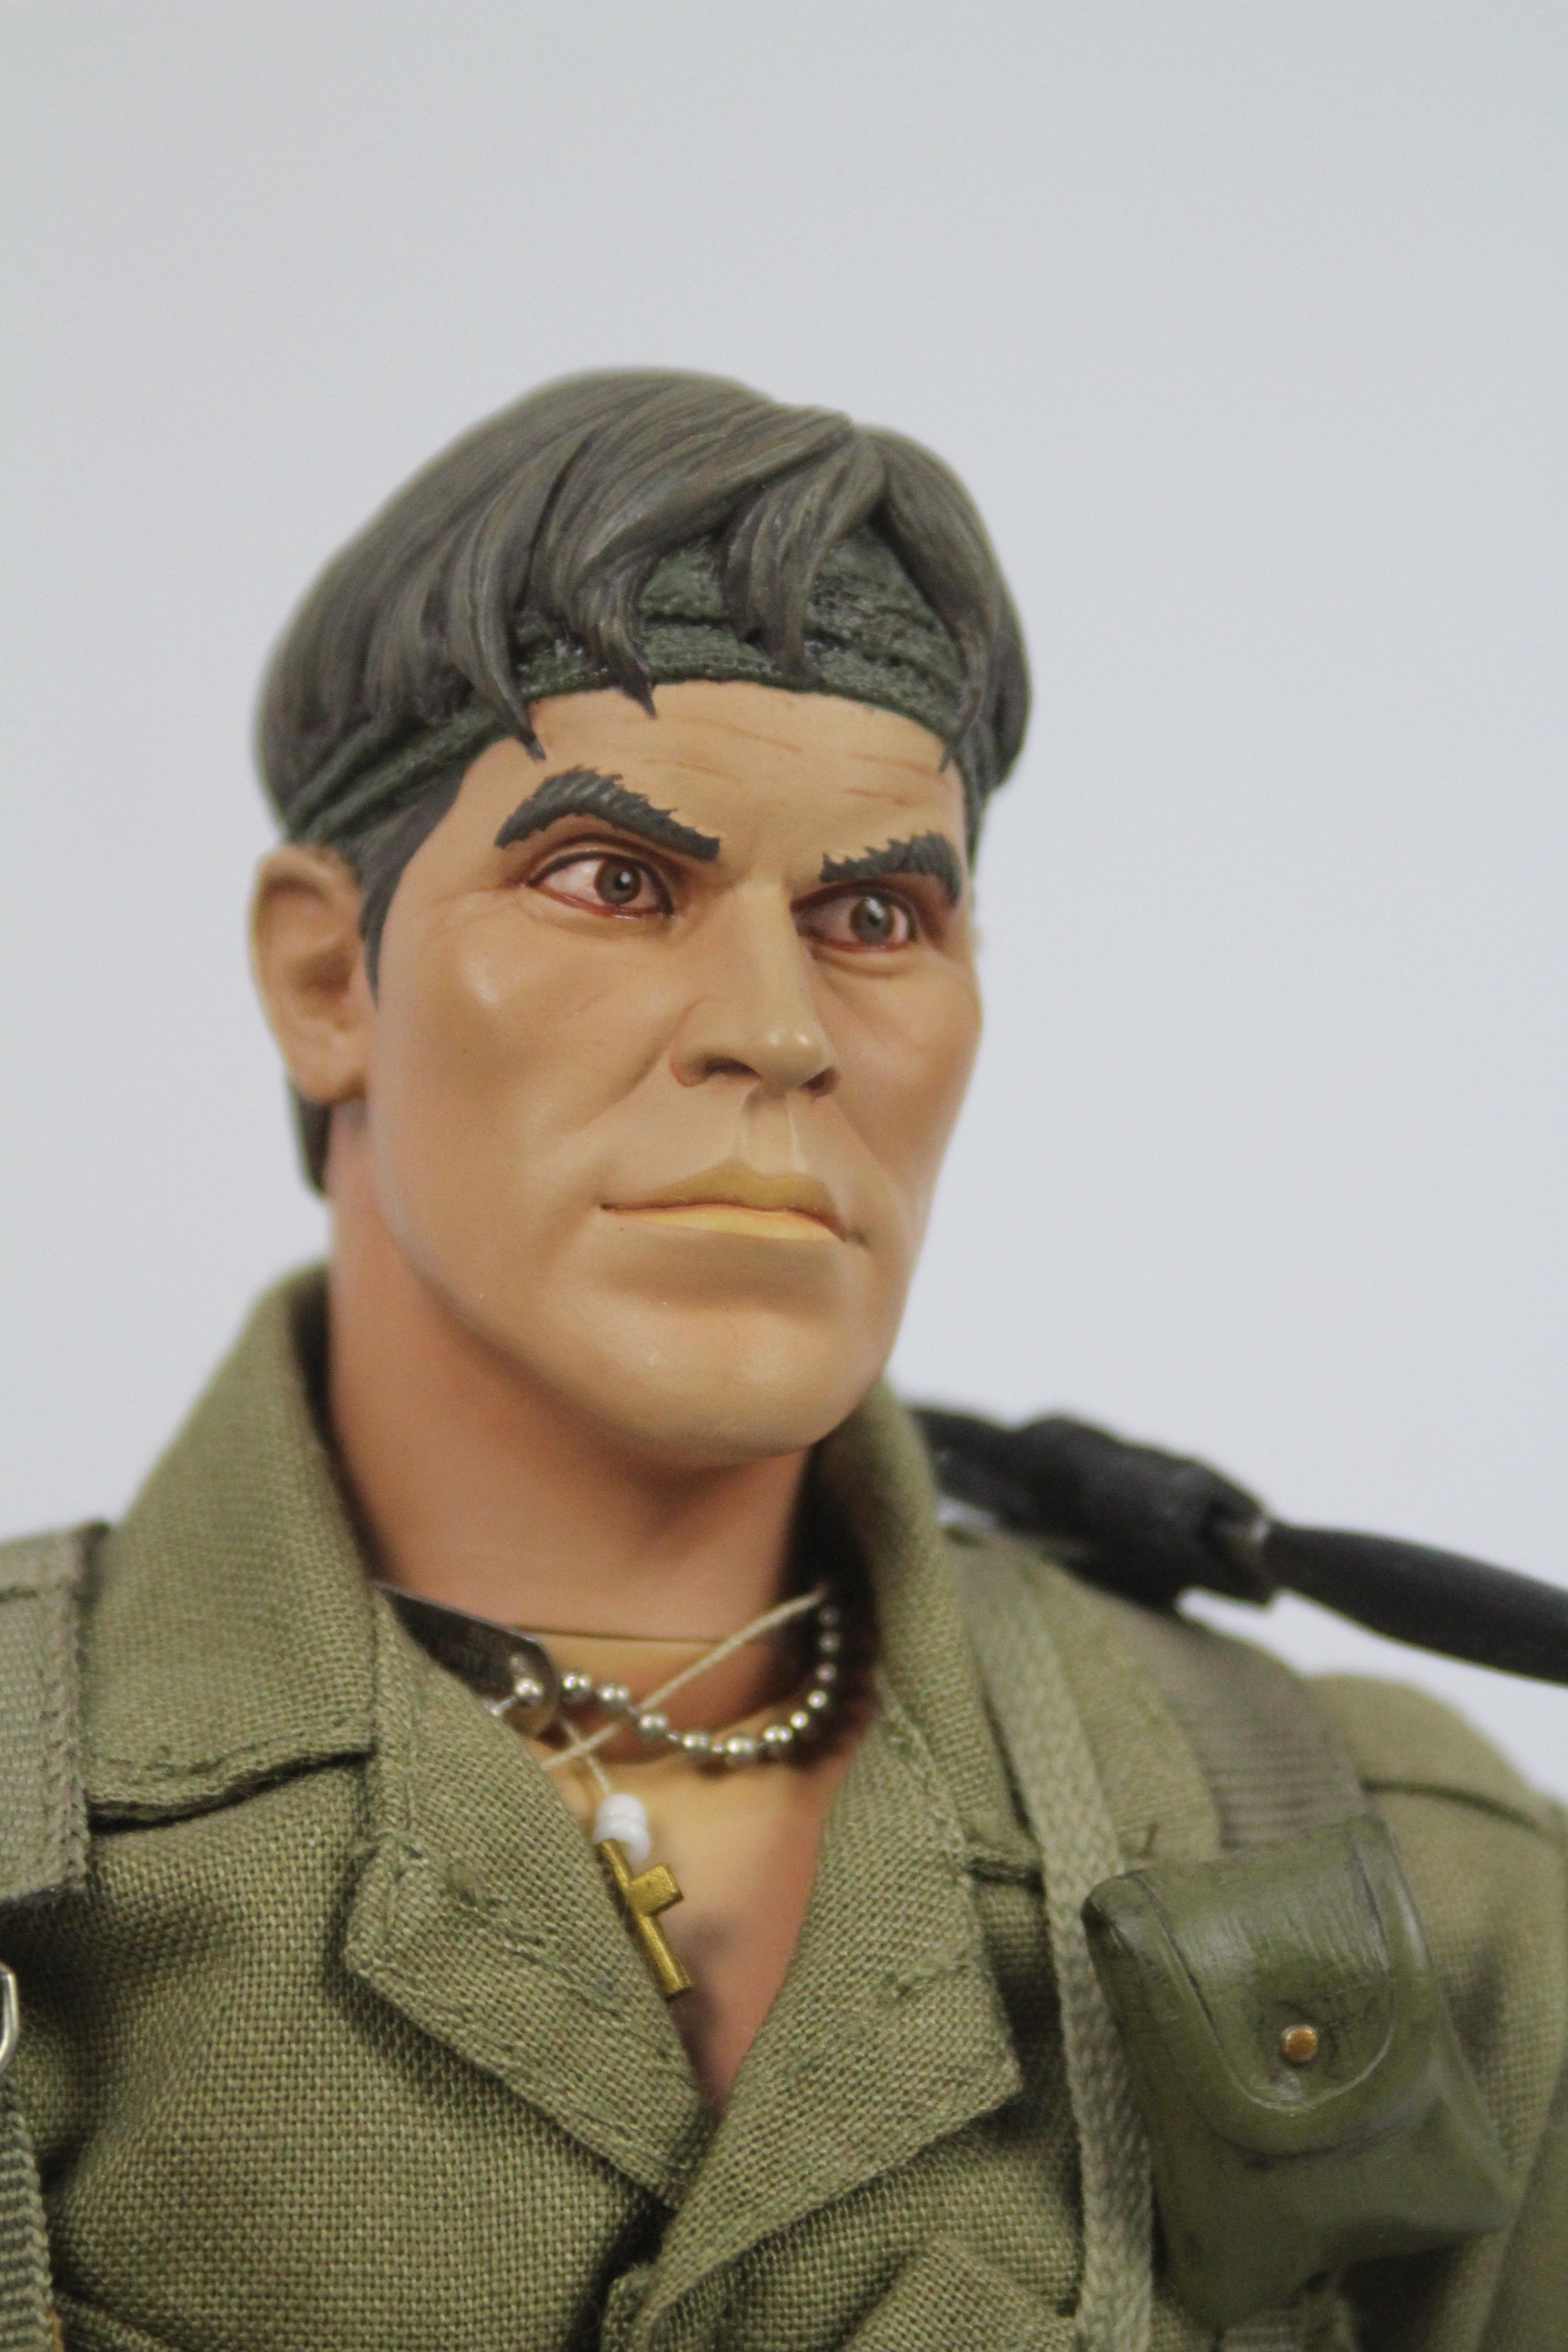 Sideshow Collectibles - Three unboxed 1:6 scale action figures from Sideshows 'Platoon' series, - Image 7 of 8